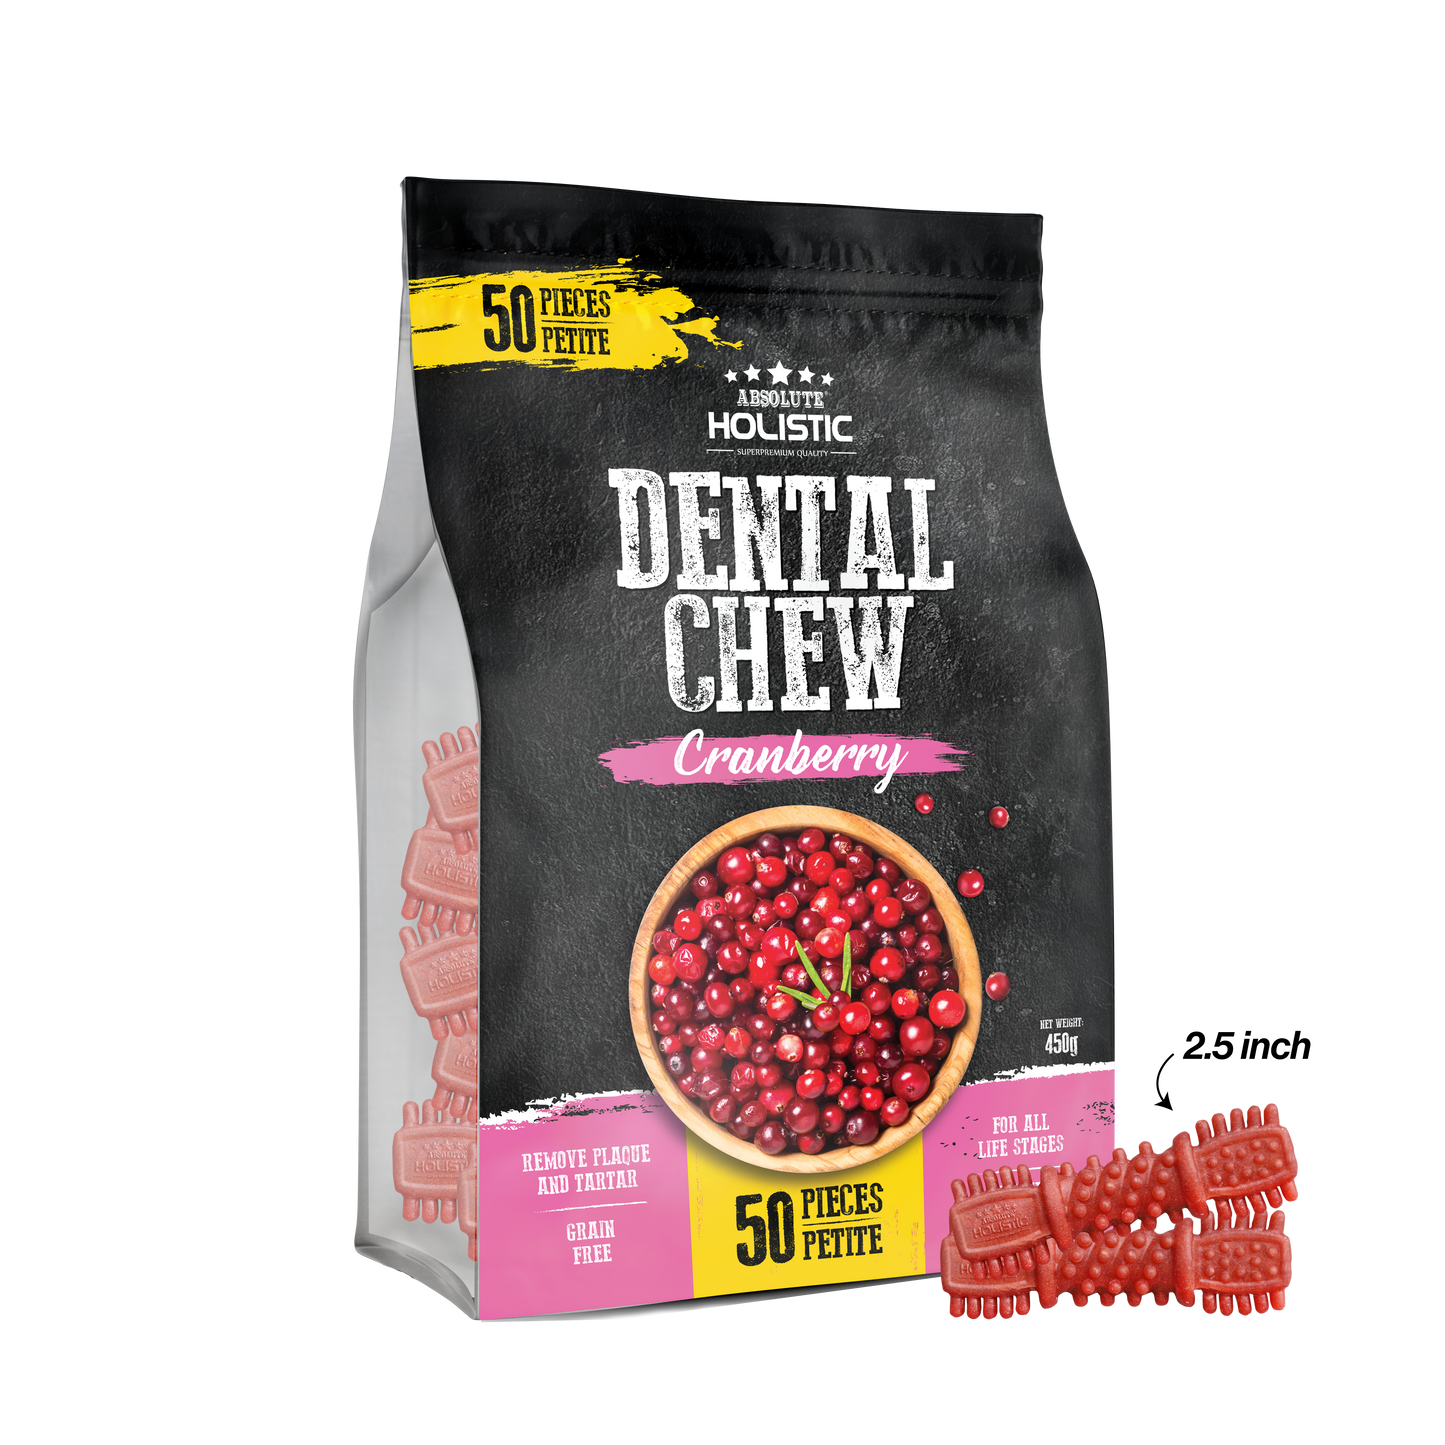 Absolute Holistic Boost Cranberry Dental Chew Jumbo Pack for Dogs (2 Sizes)